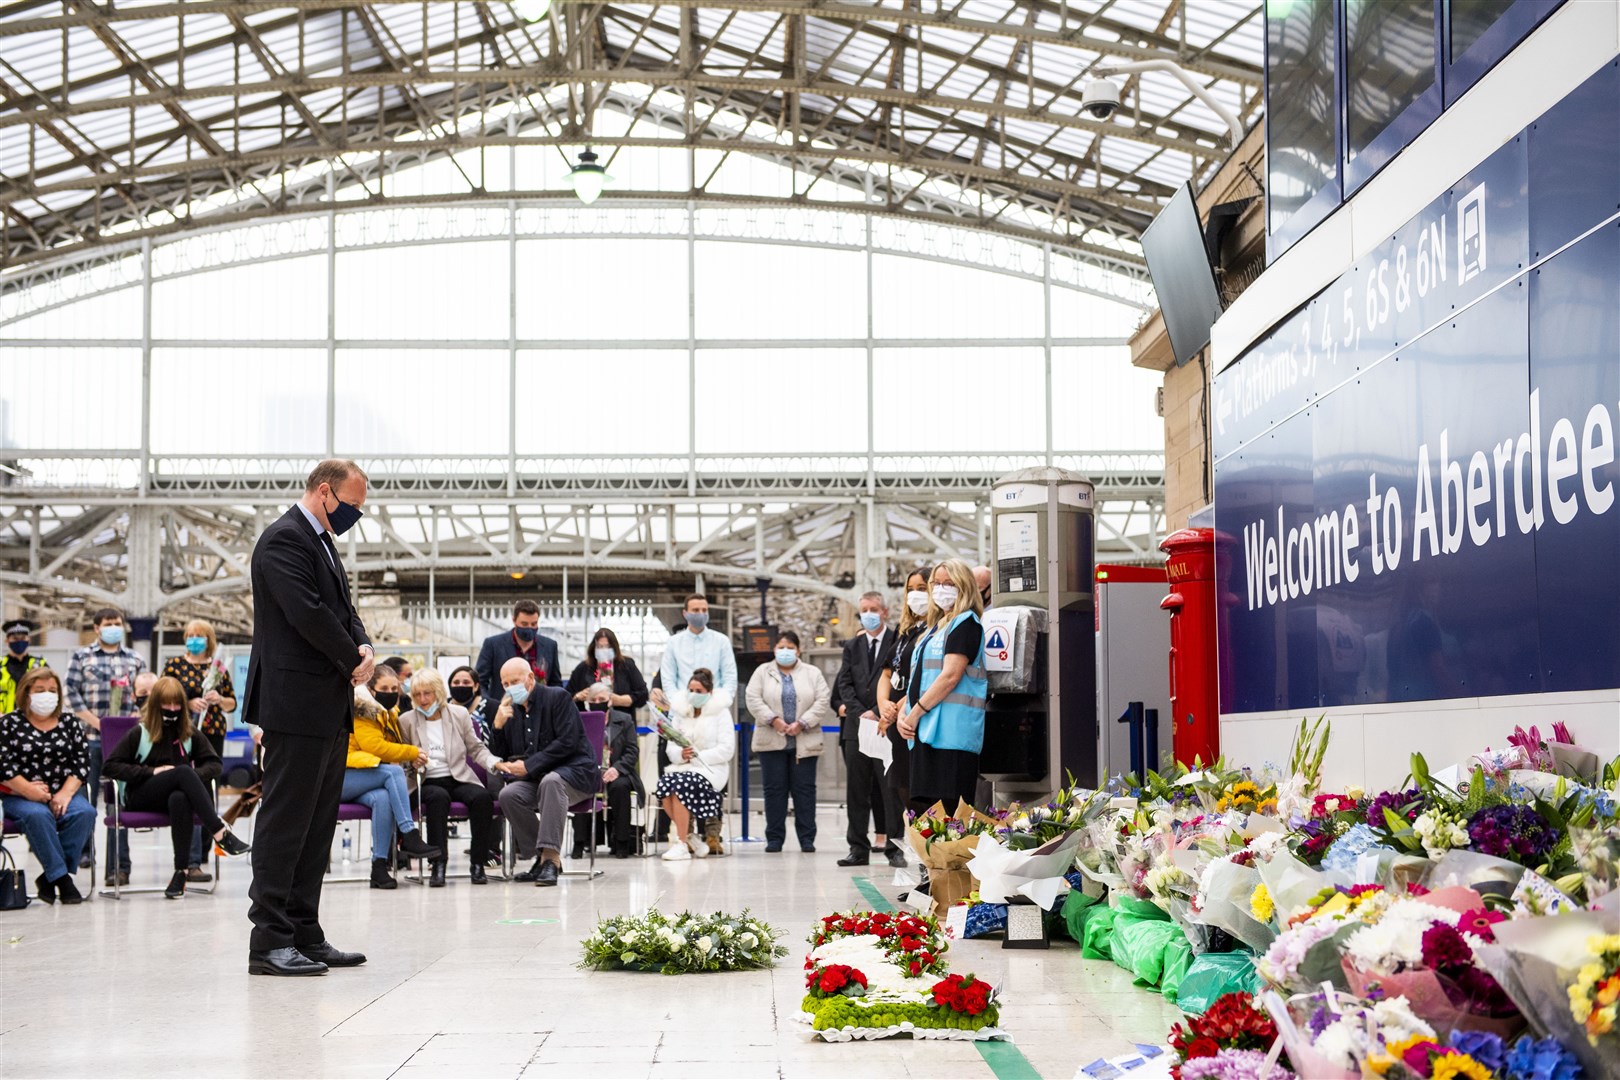 Wreaths were laid at Aberdeen station following the tragedy. Photo: ScotRail / SNS.